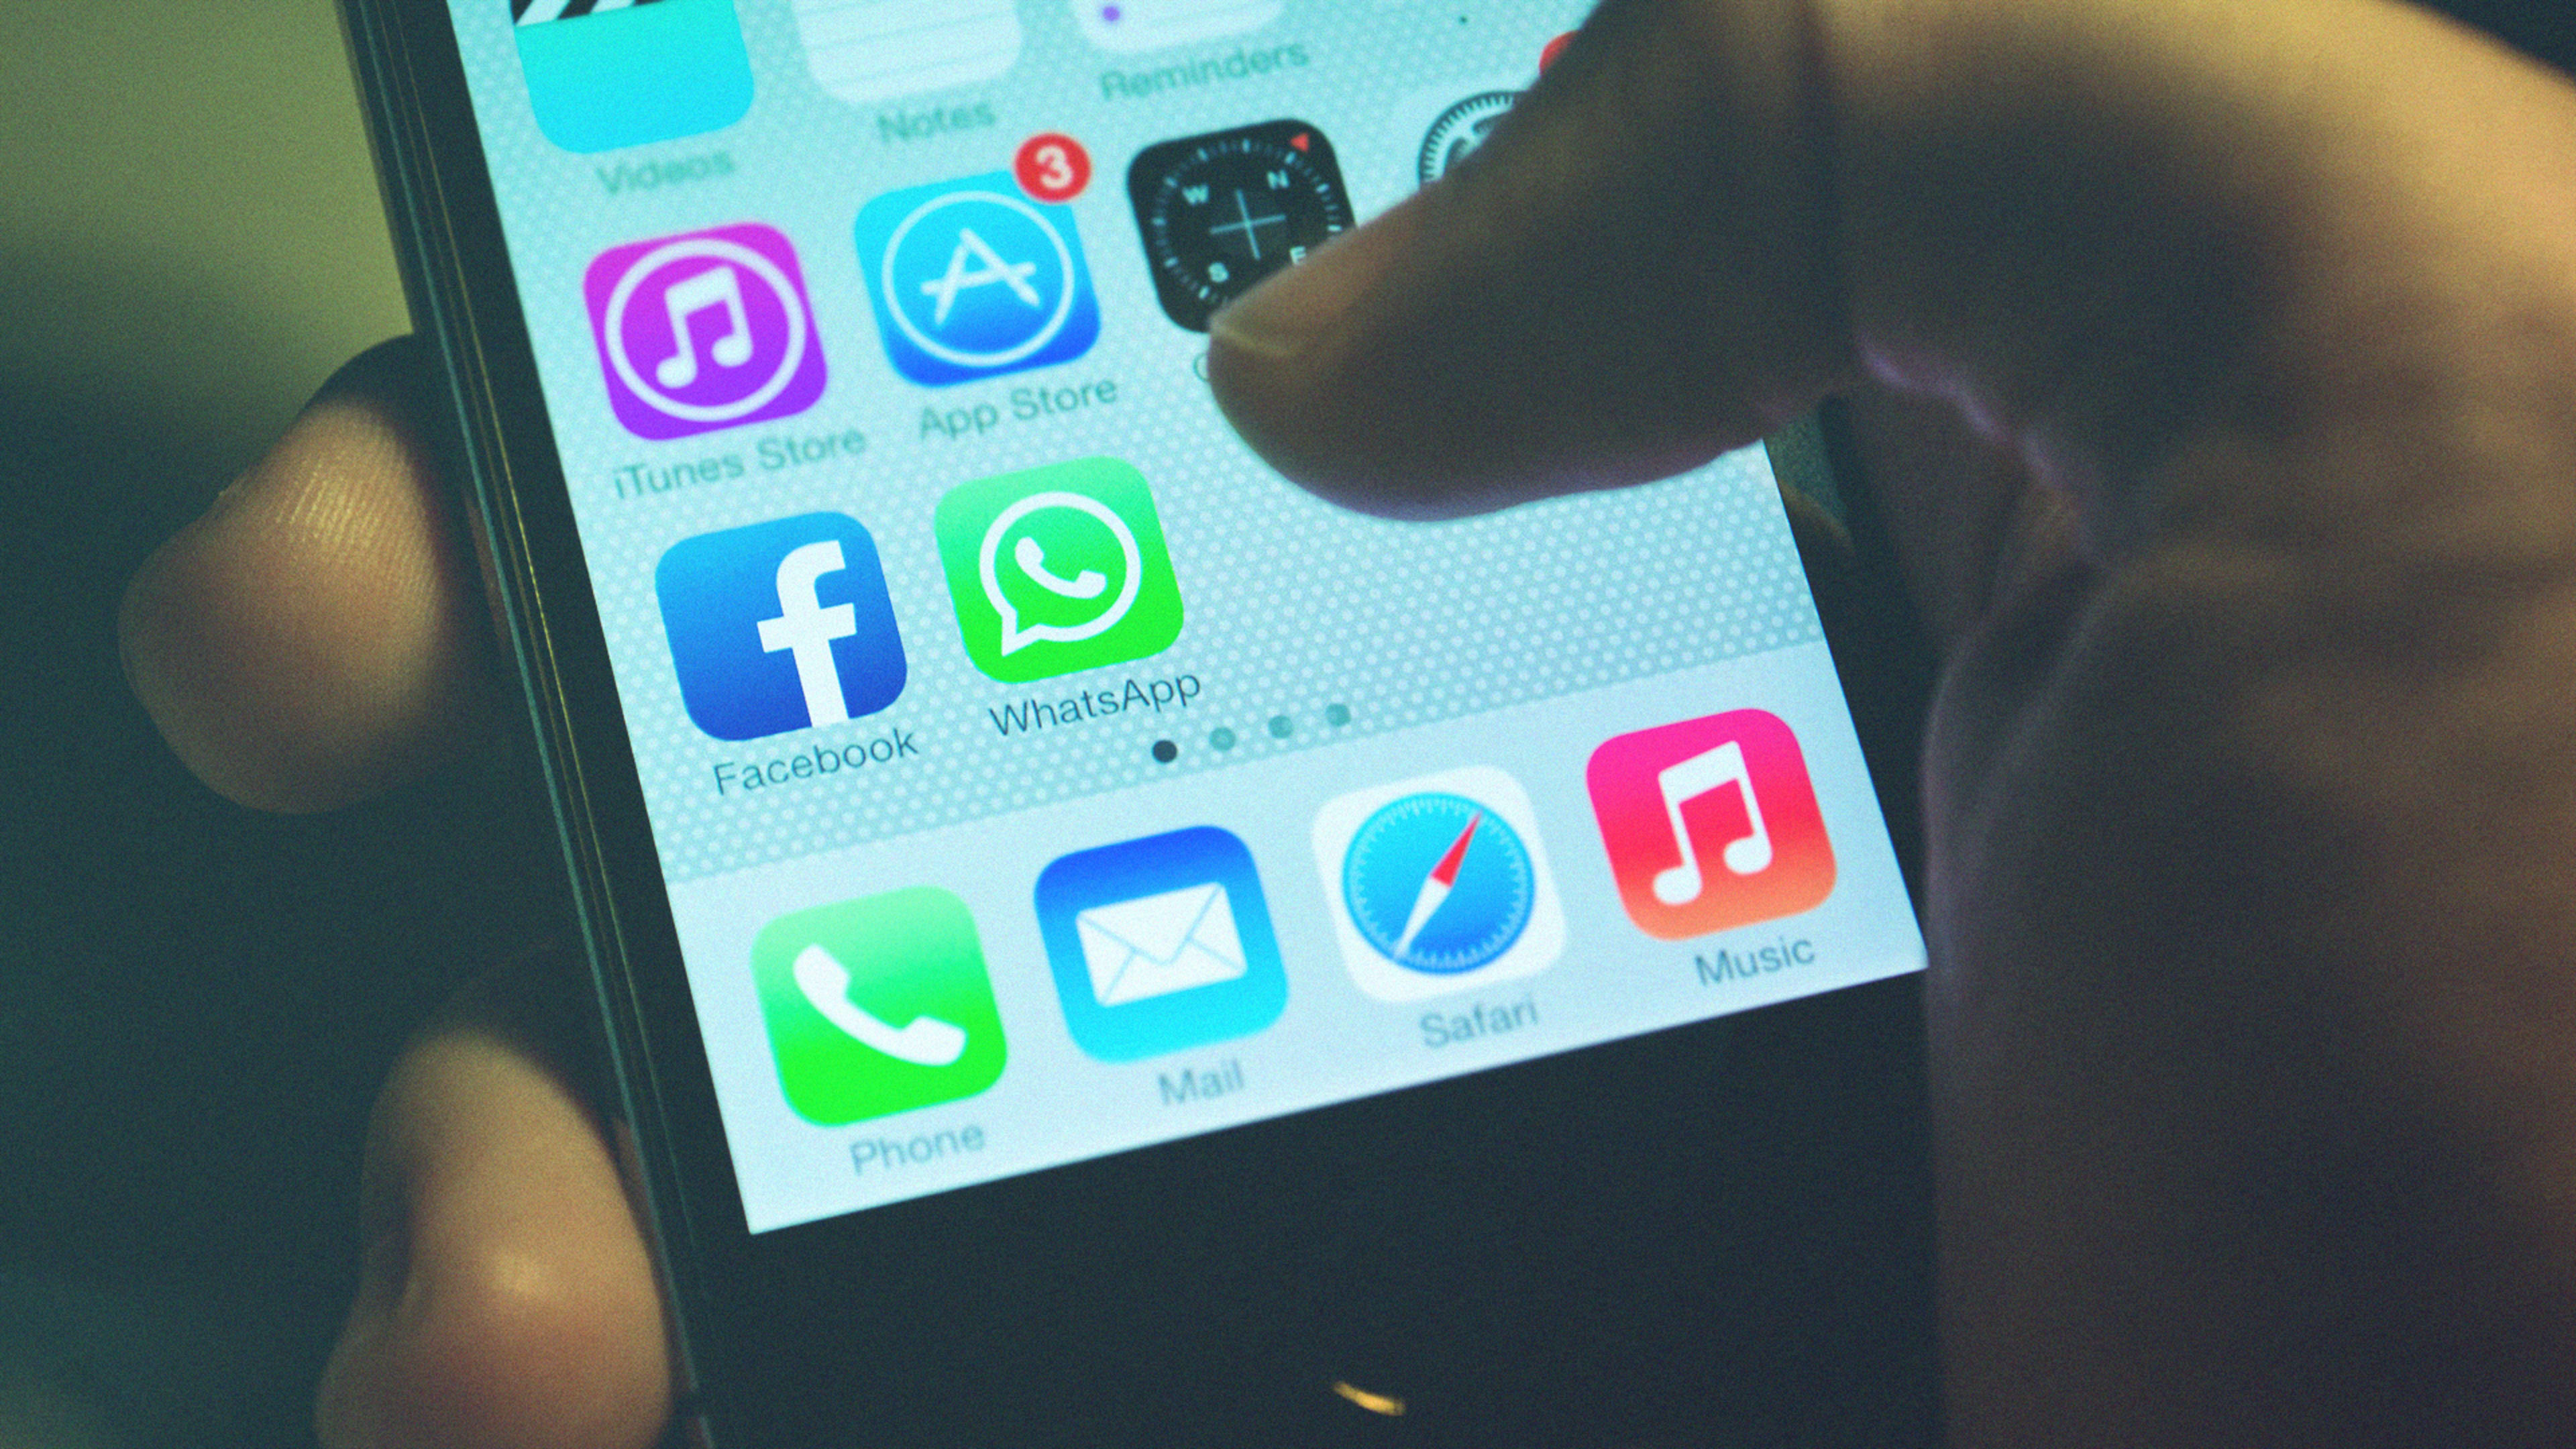 You can now delete embarrassing WhatsApp messages an hour after you send them